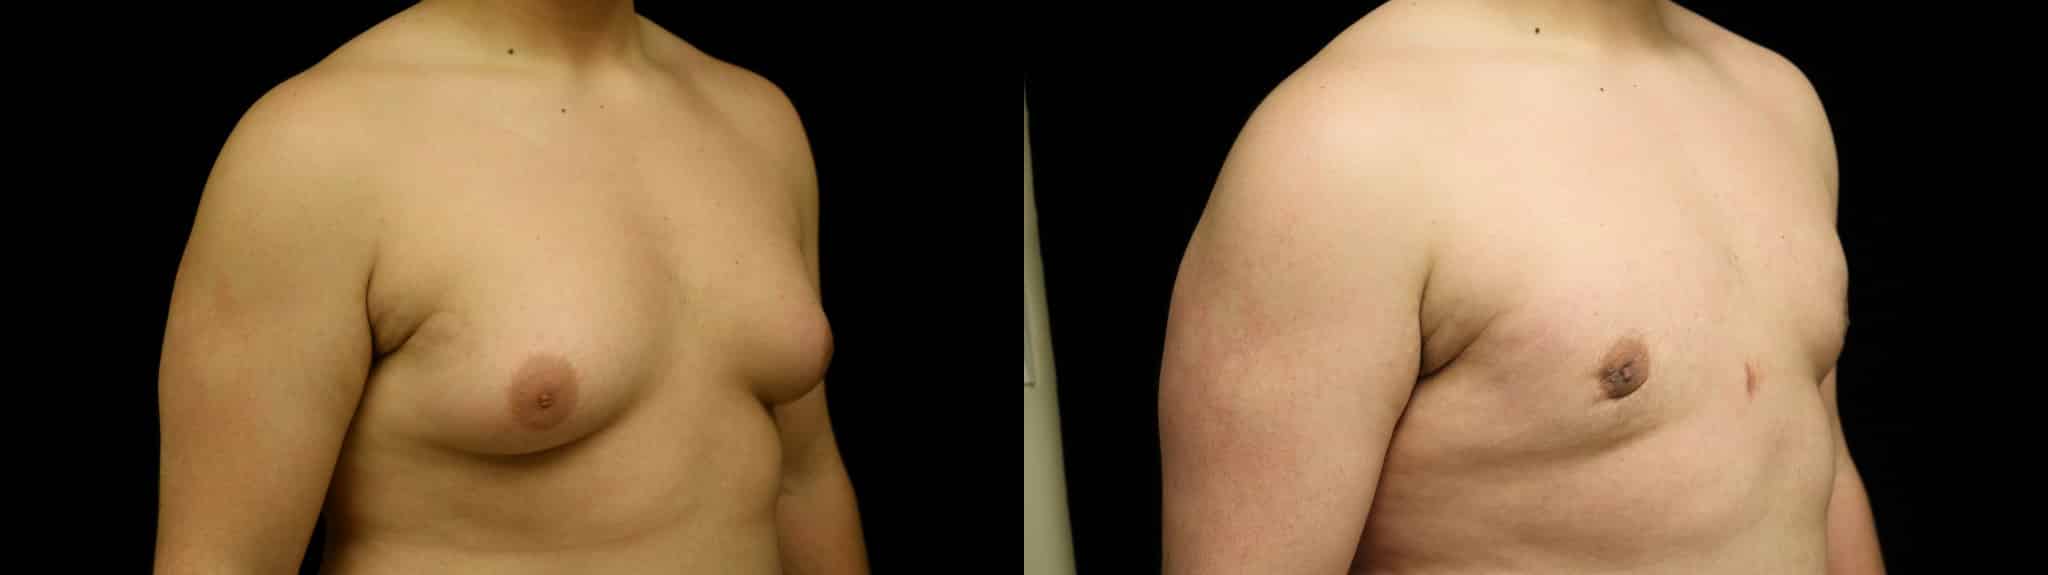 Gynecomastia Patient 5 Before & After Details